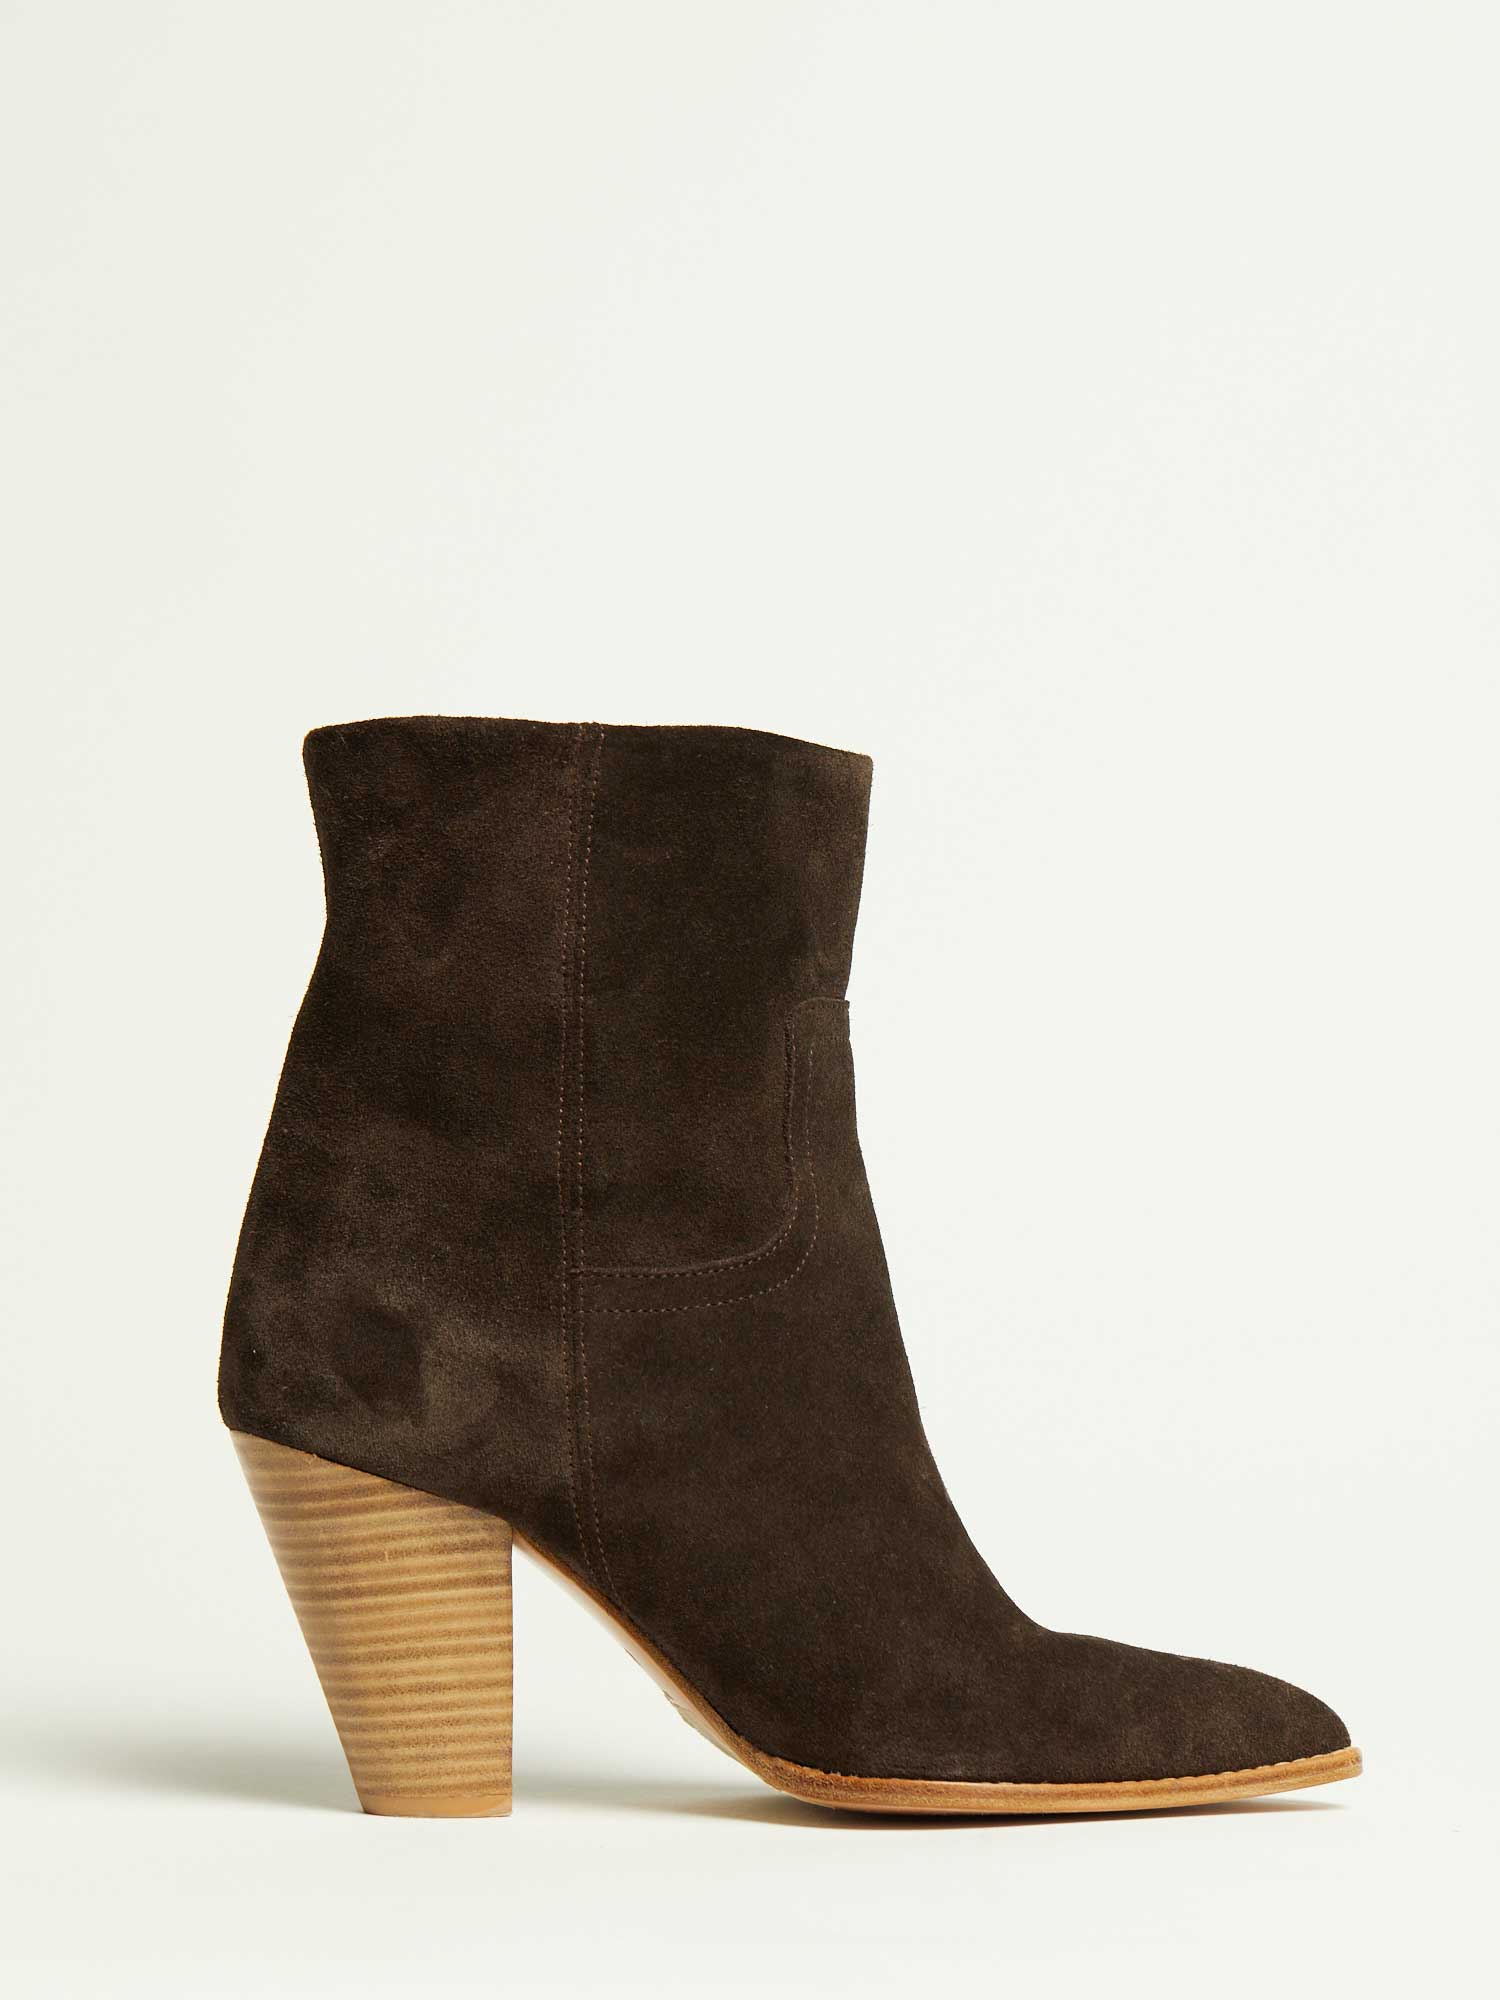 Marfa brown suede boot side view 3